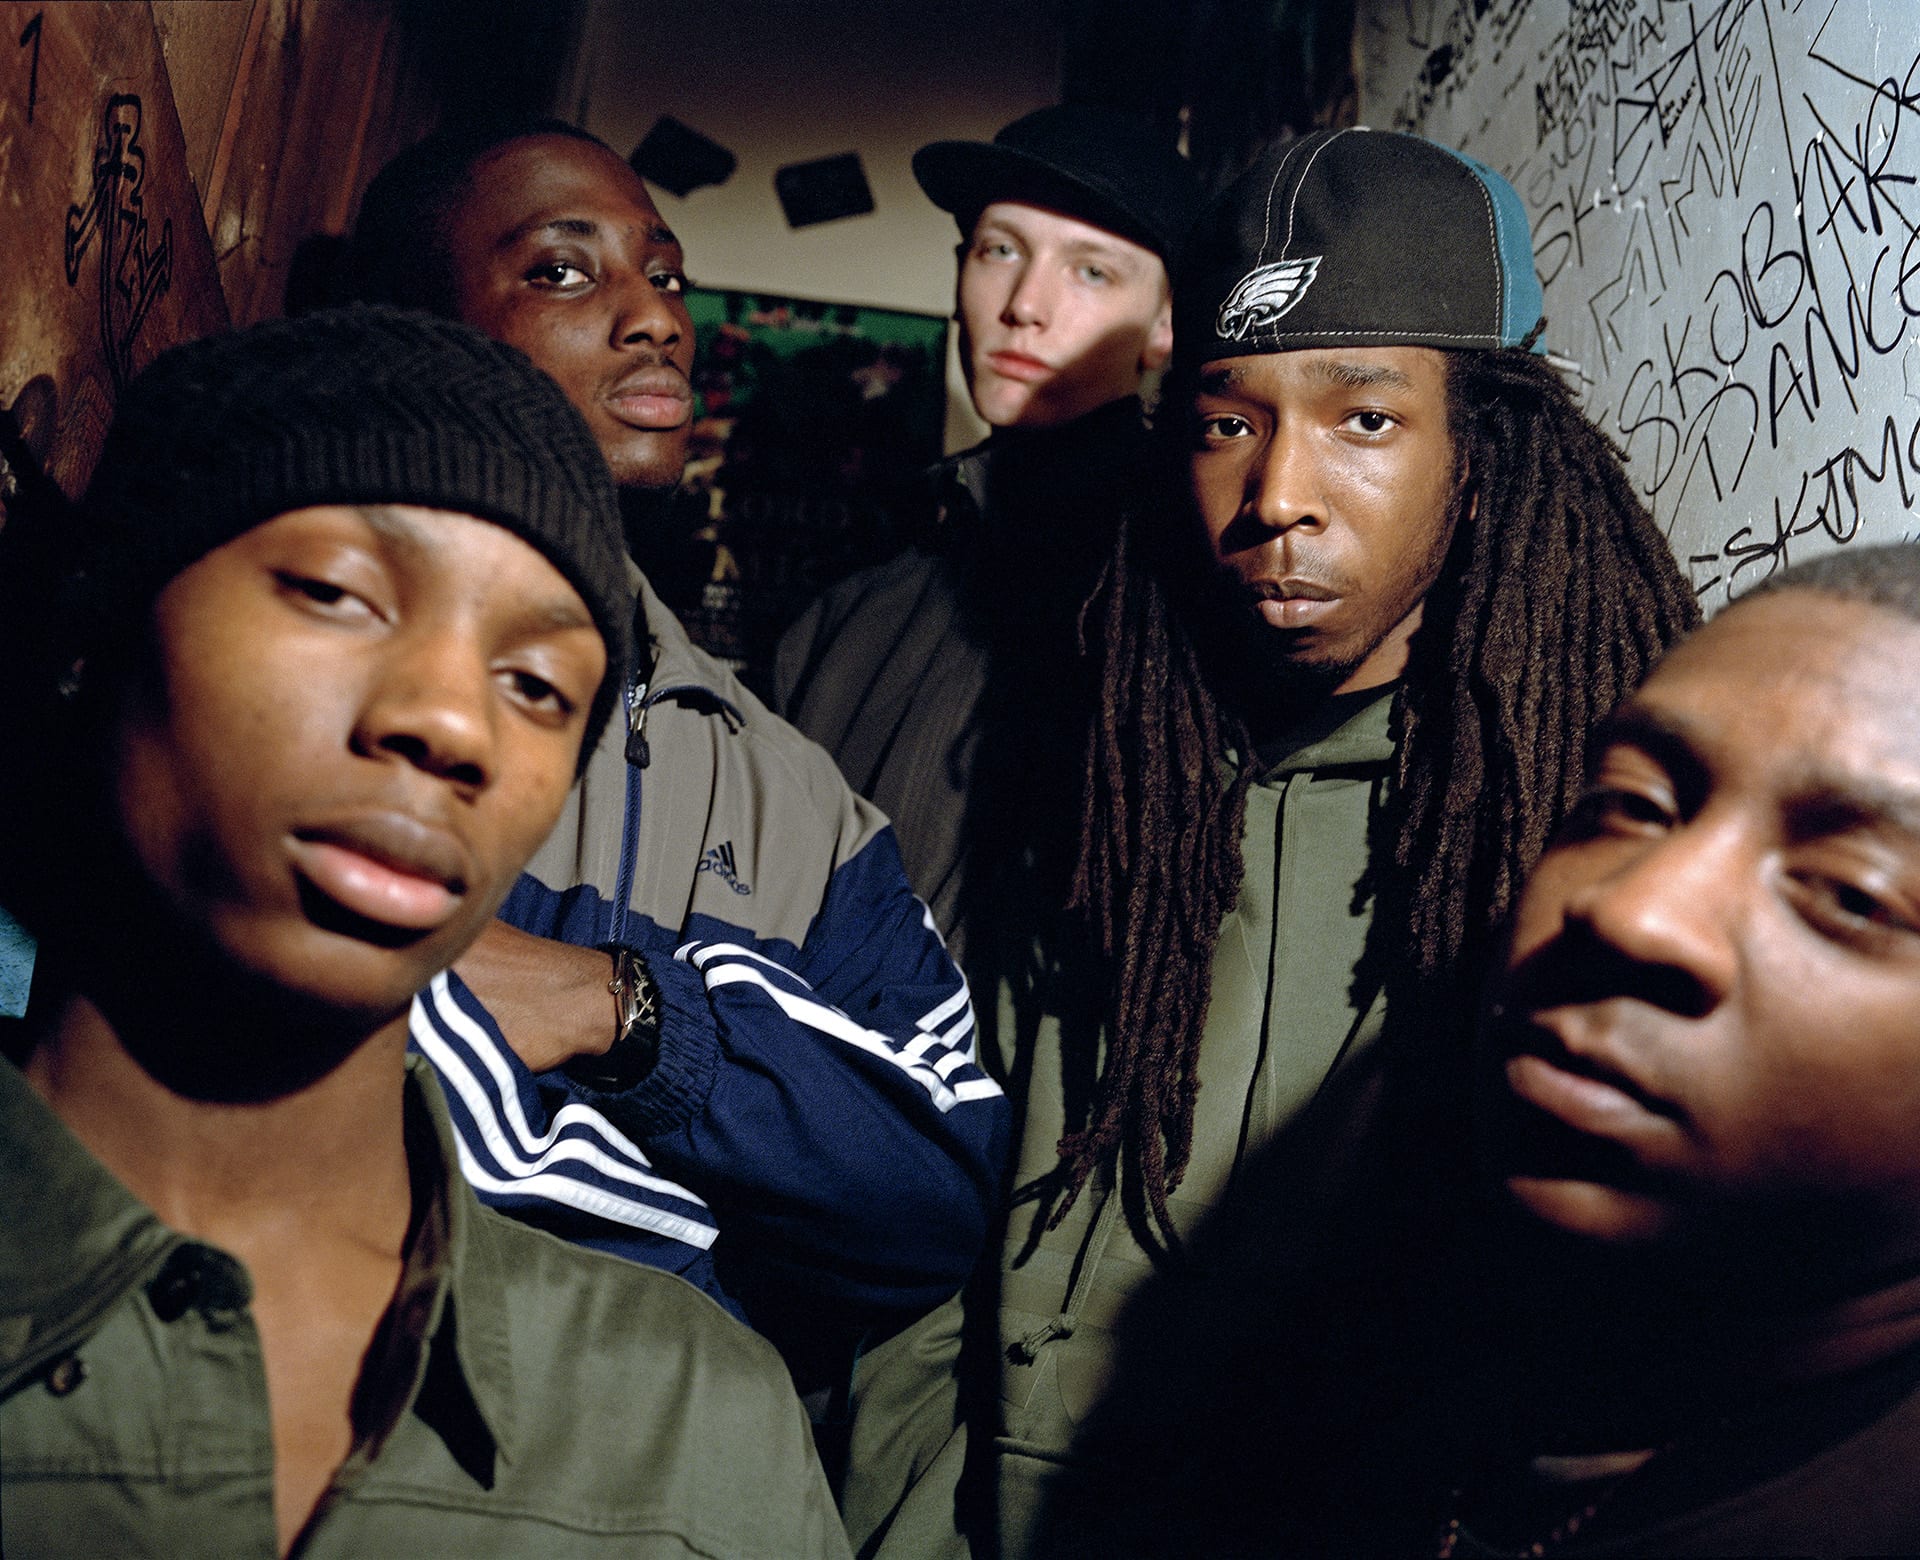 Jammer (centre, in focus) and his producers, Leytonstone. 2005